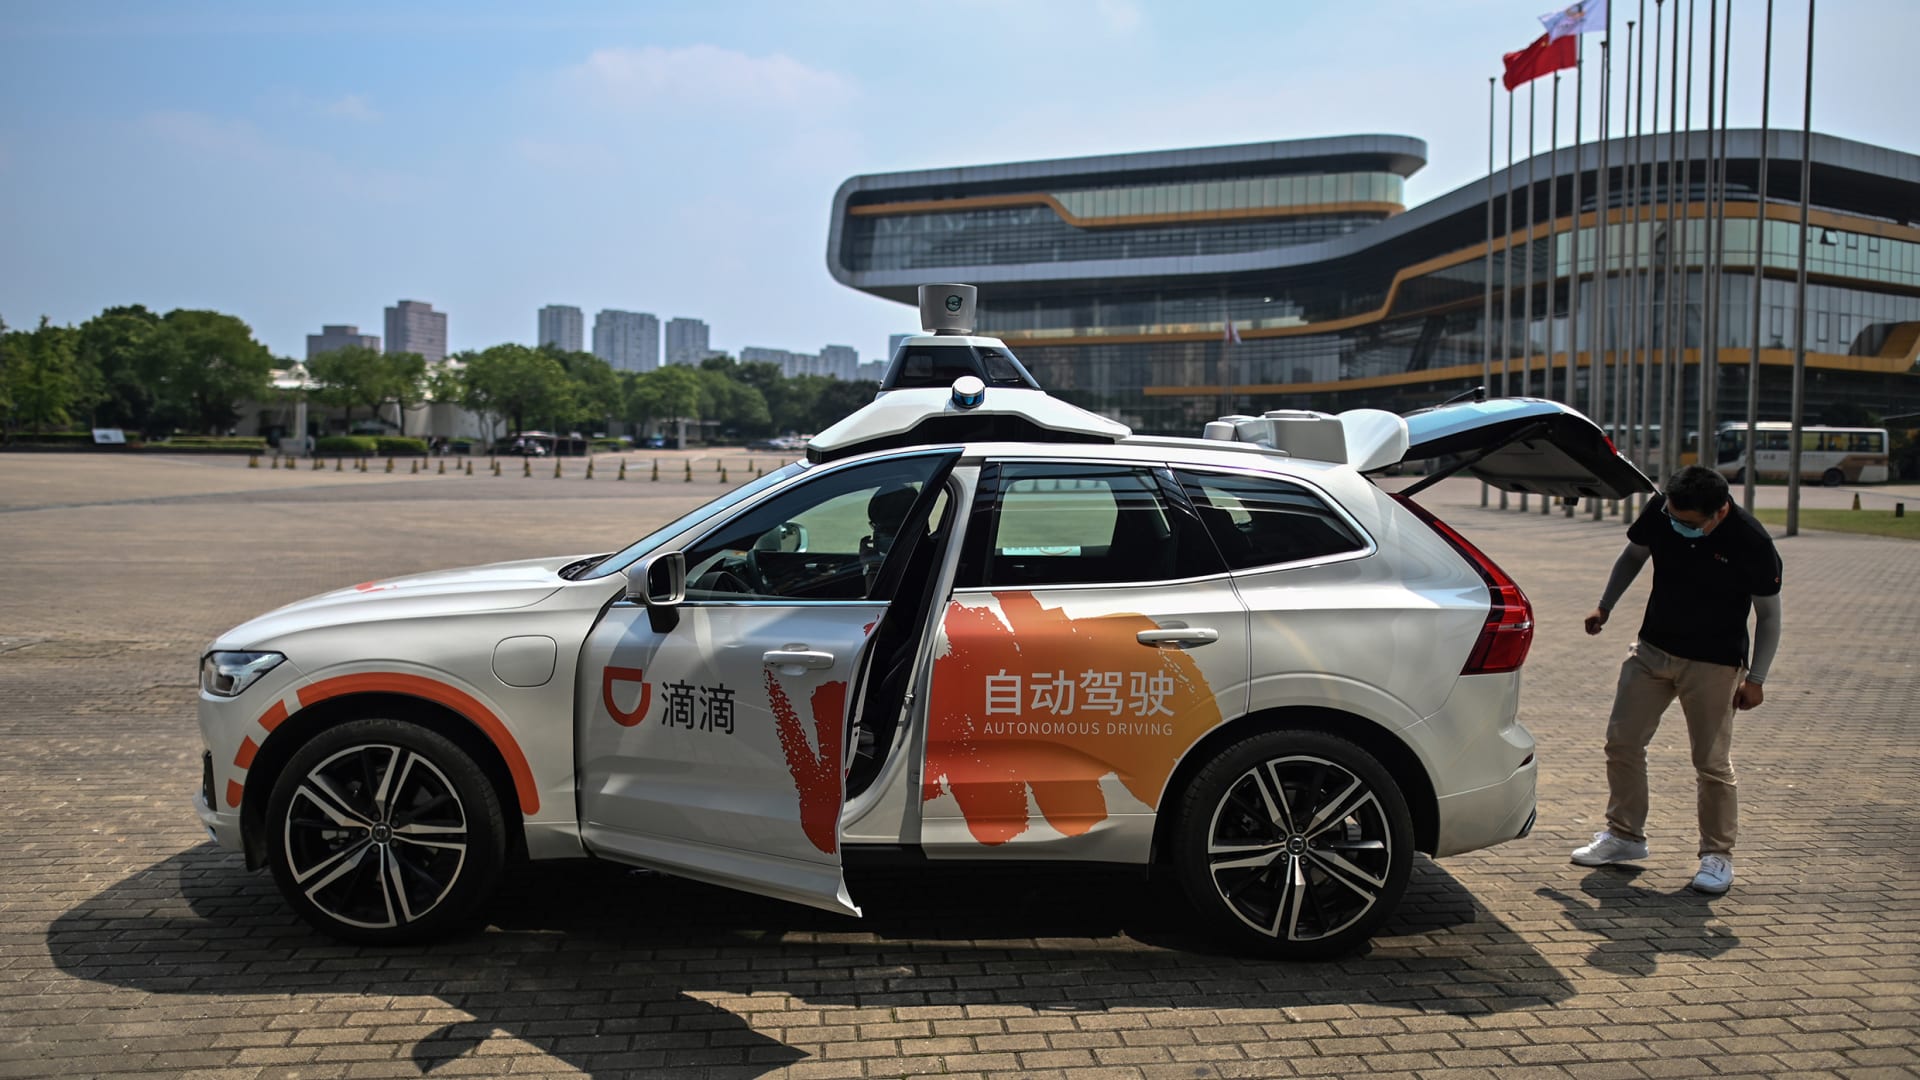 China’s ride-hailing giant Didi could be the world’s biggest IPO this year